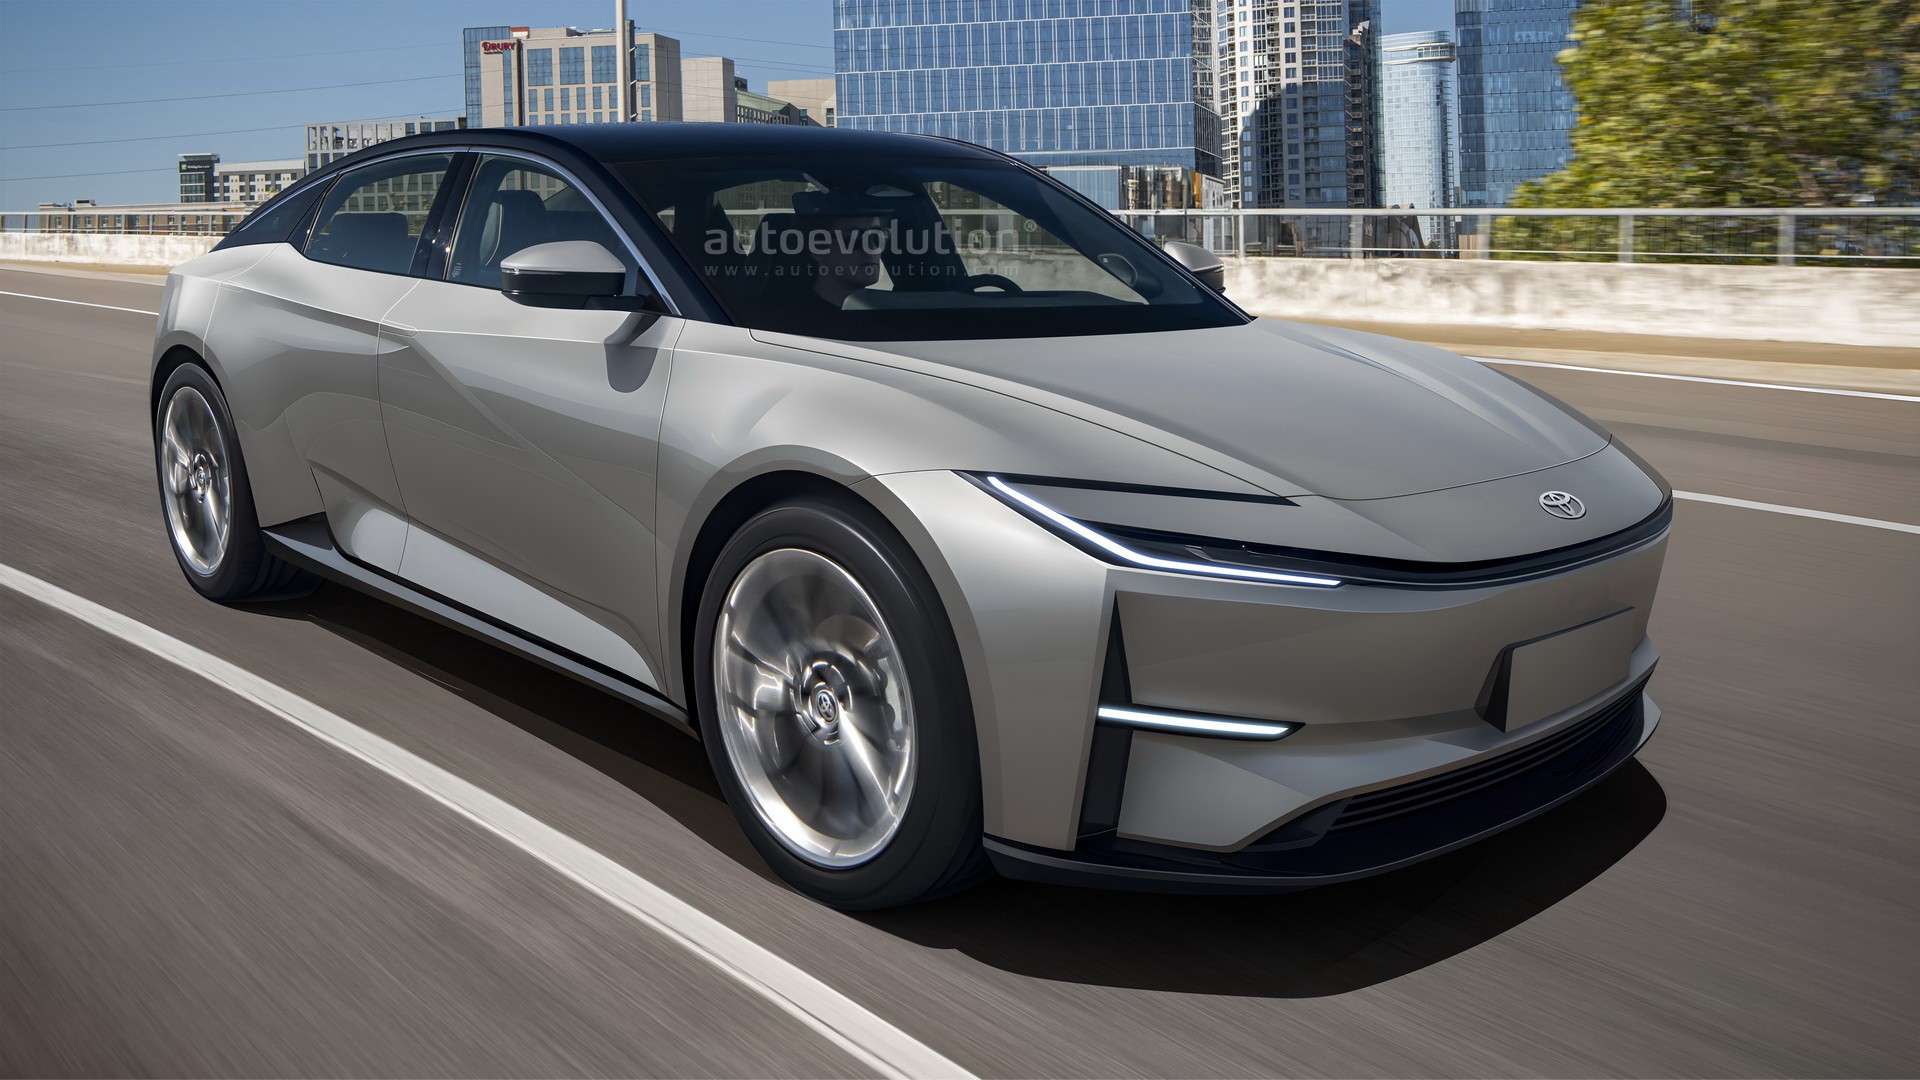 next-gen-2030-toyota-camry-ev-takes-the-fight-to-tesla-check-out-our-exclusive-design-1.jpg